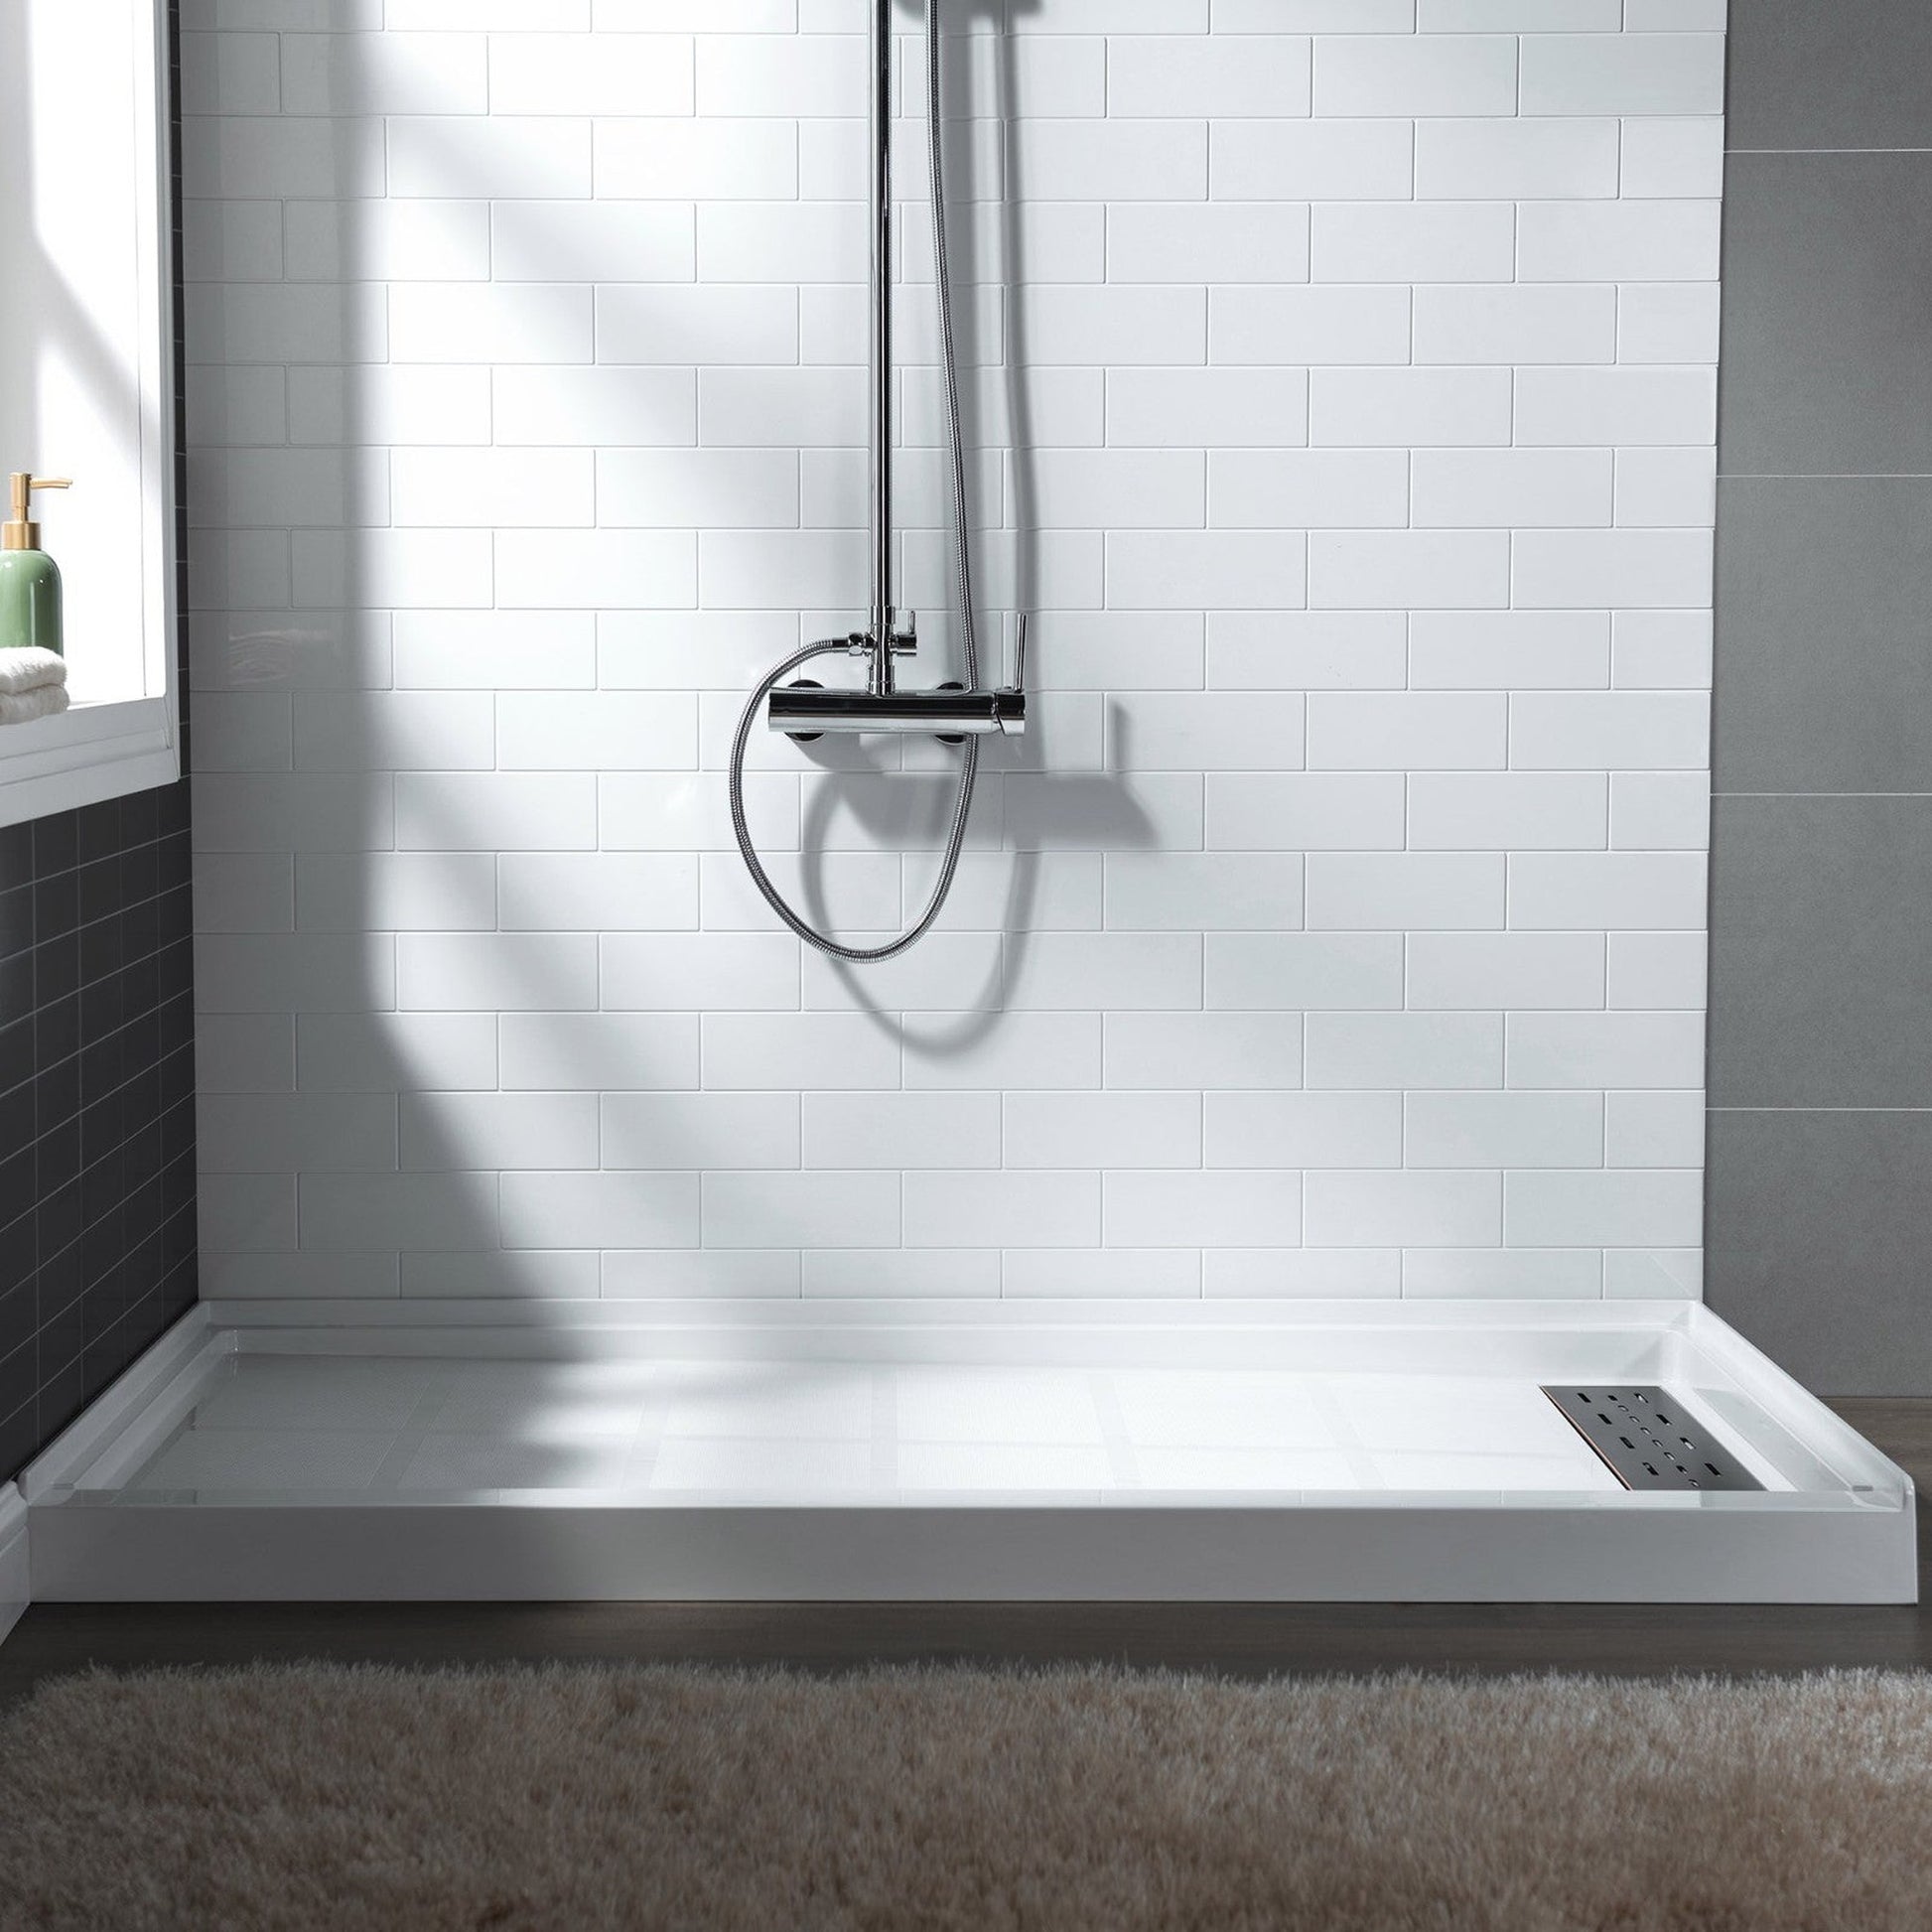 WoodBridge 60" x 32" White Solid Surface Shower Base Right Drain Location With Oil Rubbed Bronze Trench Drain Cover